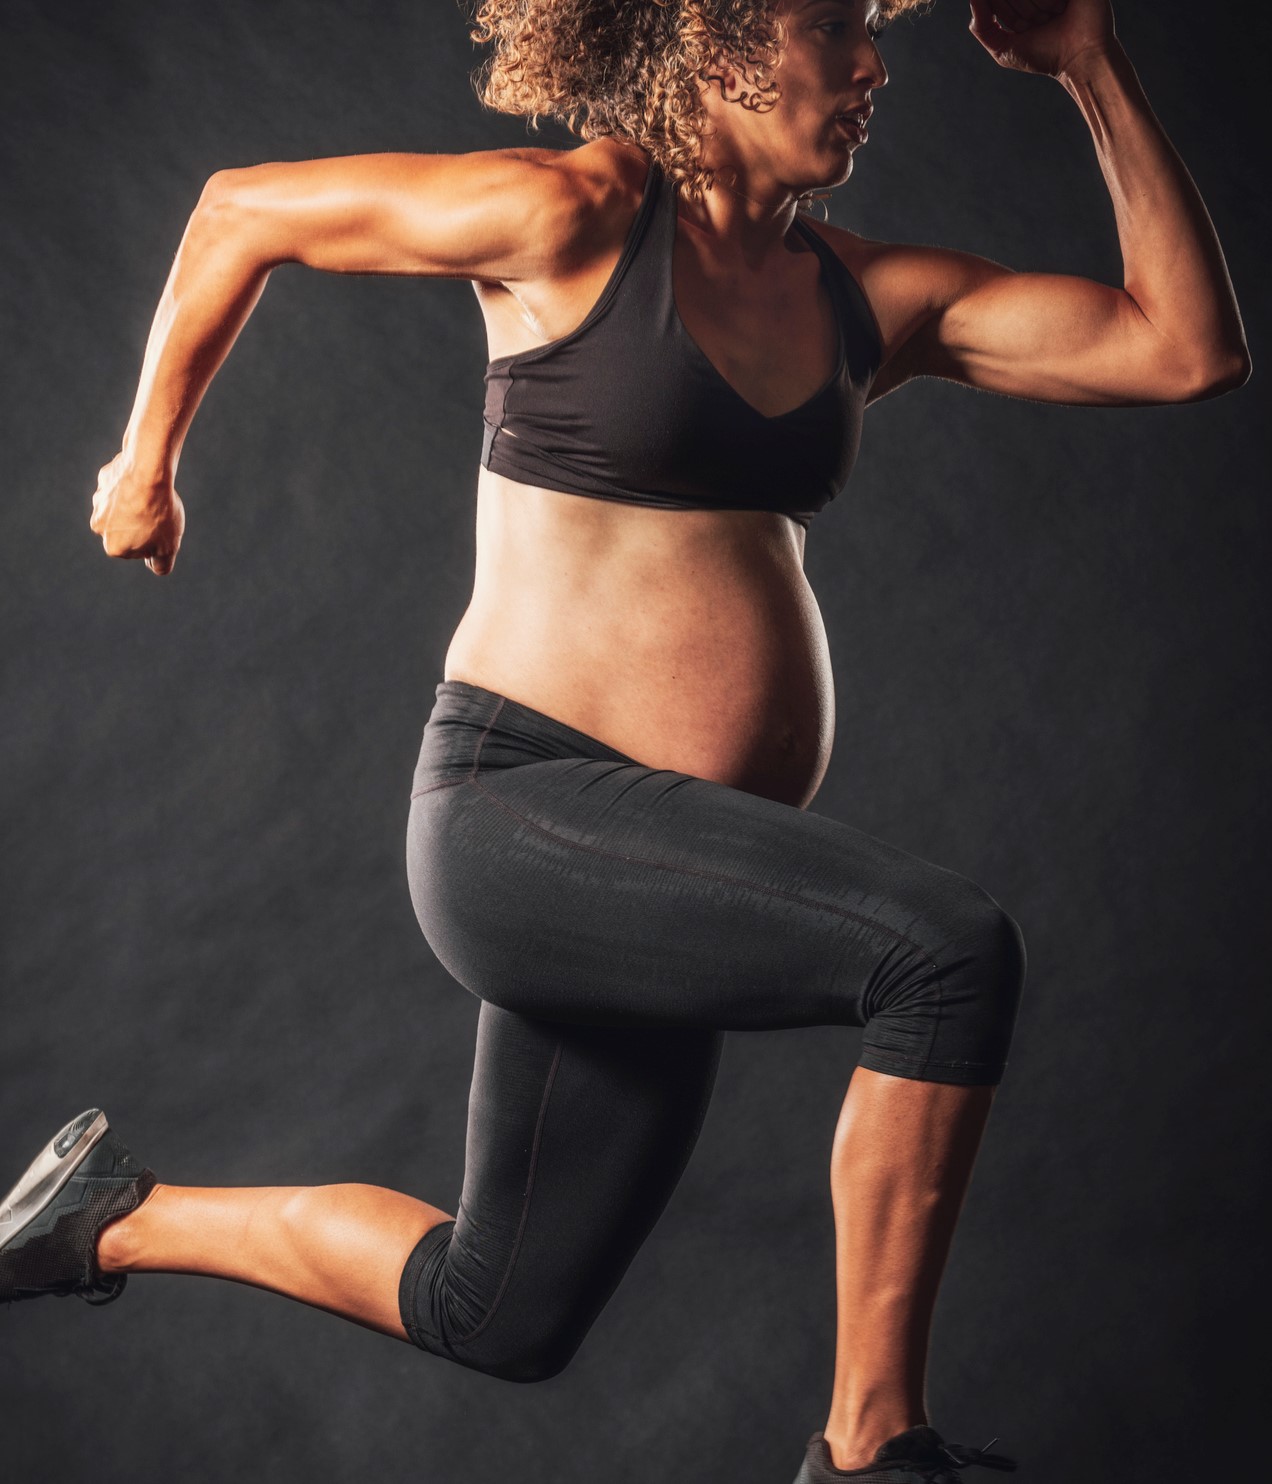 Creating a Pregnancy Policy that Empowers Athletes - Workforce 21C